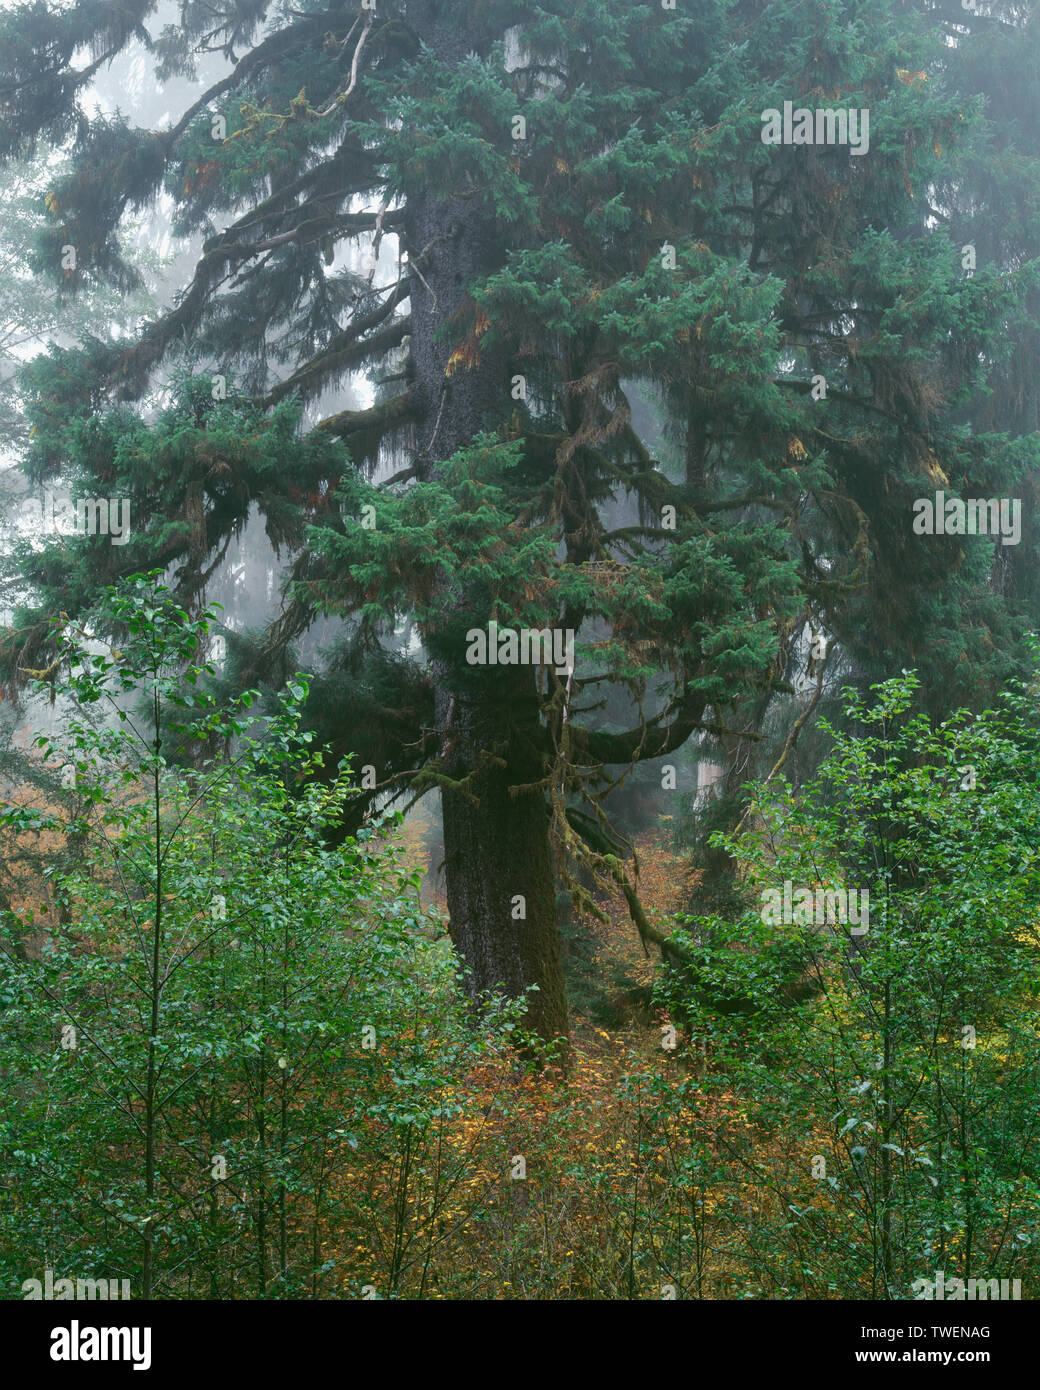 USA, Washington, Olympic National Park,  Fog shrouds rainforest with red alder and giant Sitka spruce, Queets Valley. Stock Photo